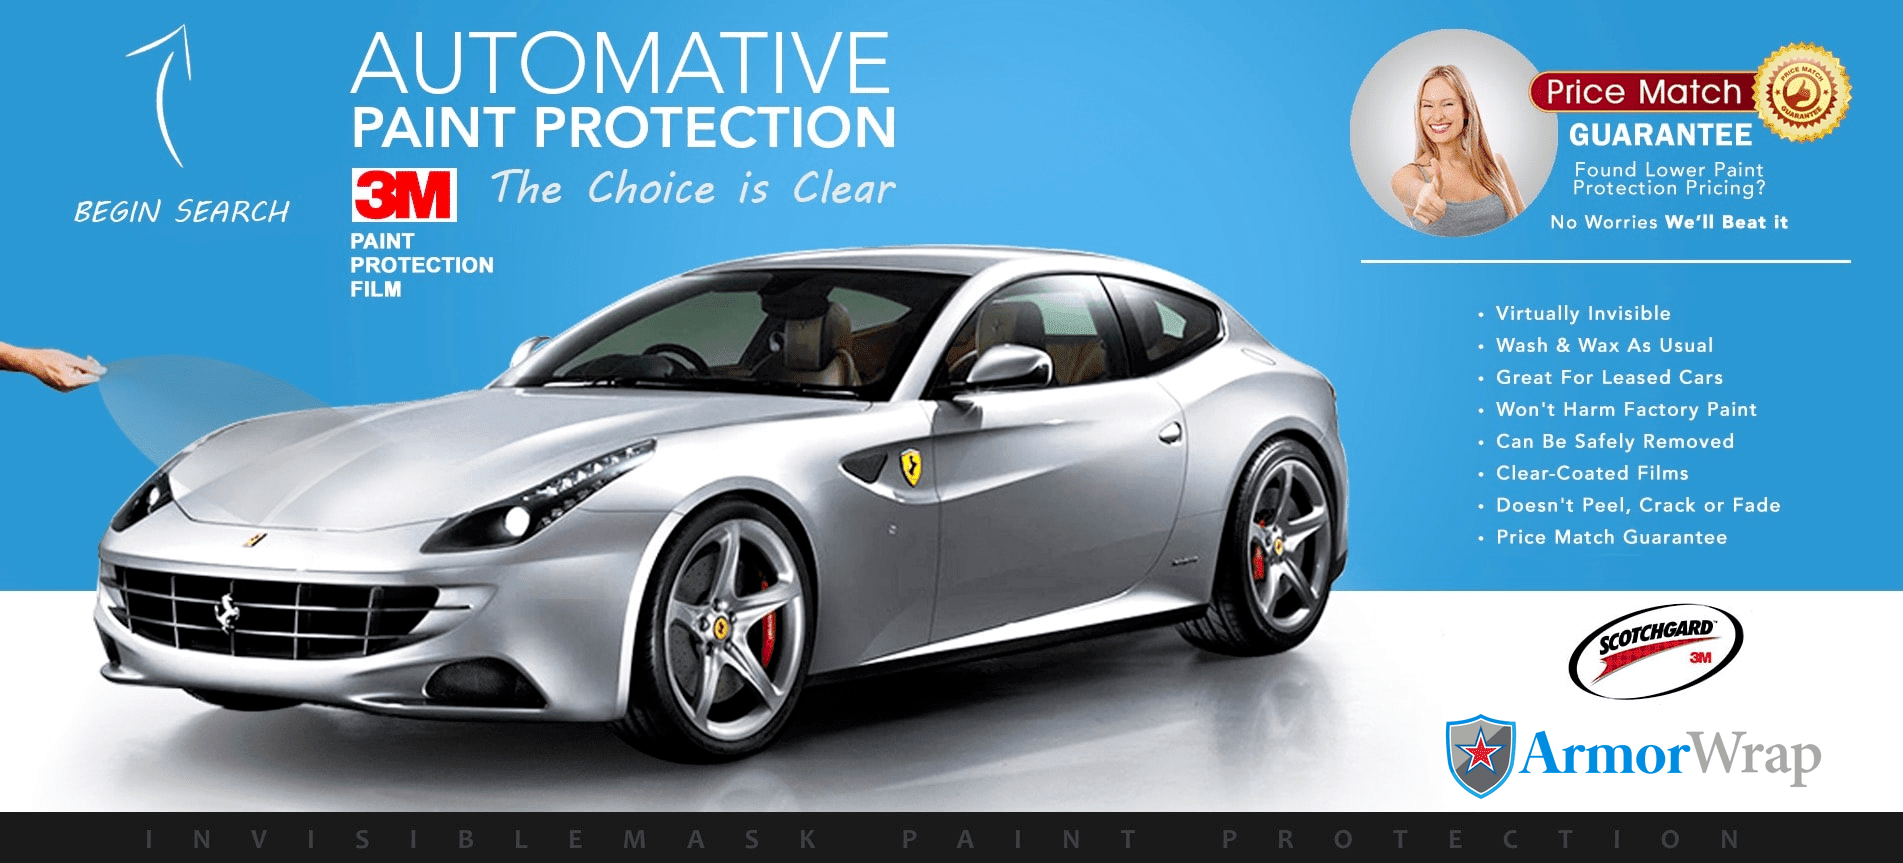 Search for Paint Protection Kit